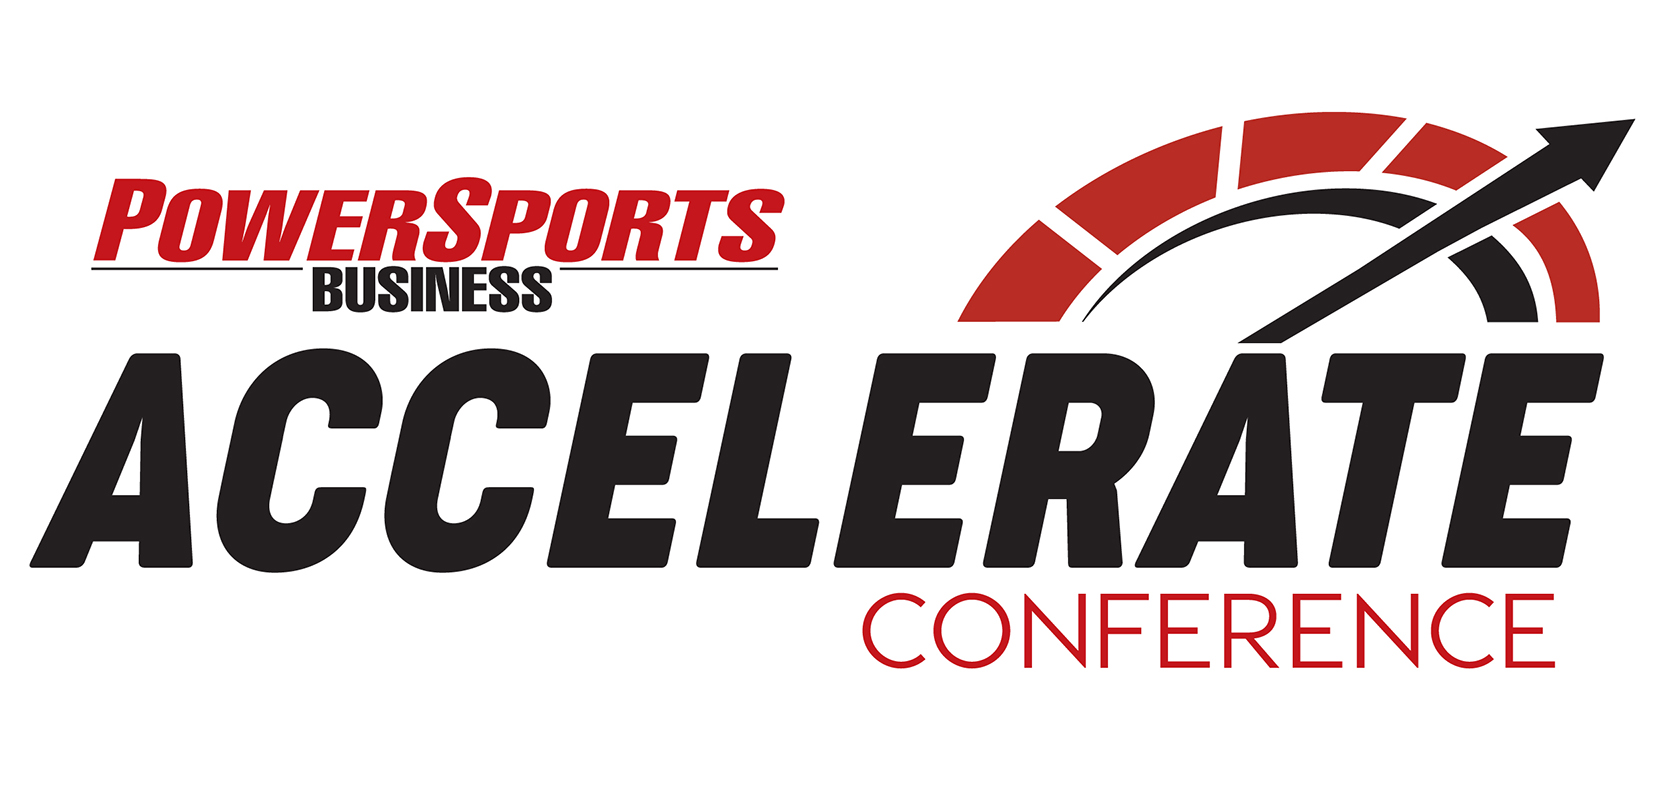 Gold-level sponsor MotoTV Networks added to Accelerate Conference